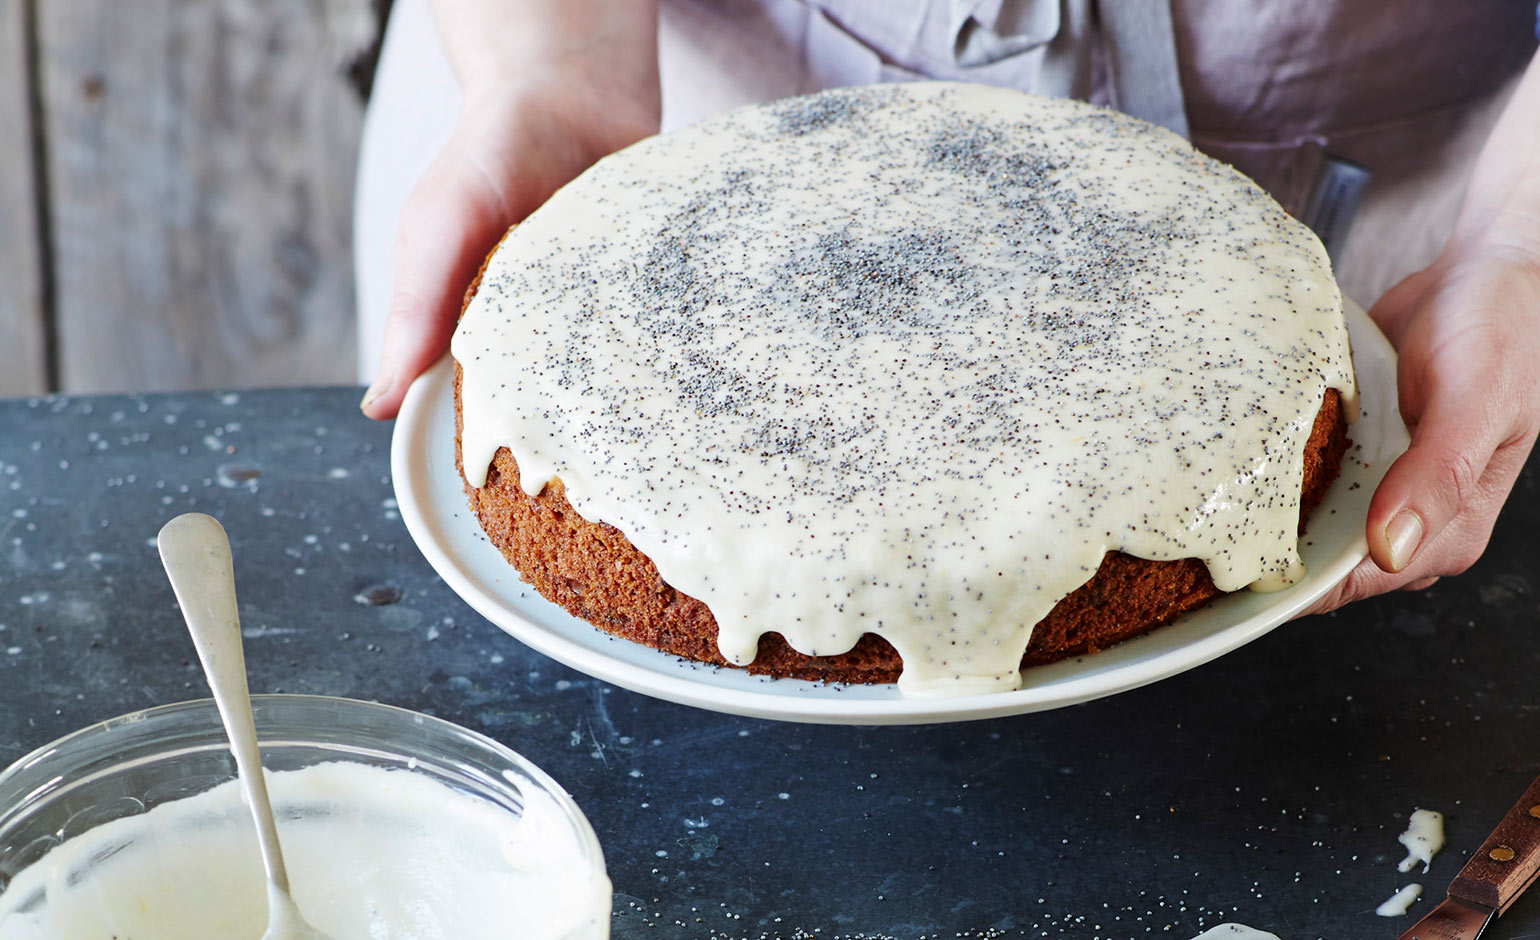 Courgette, lemon and poppyseed cake